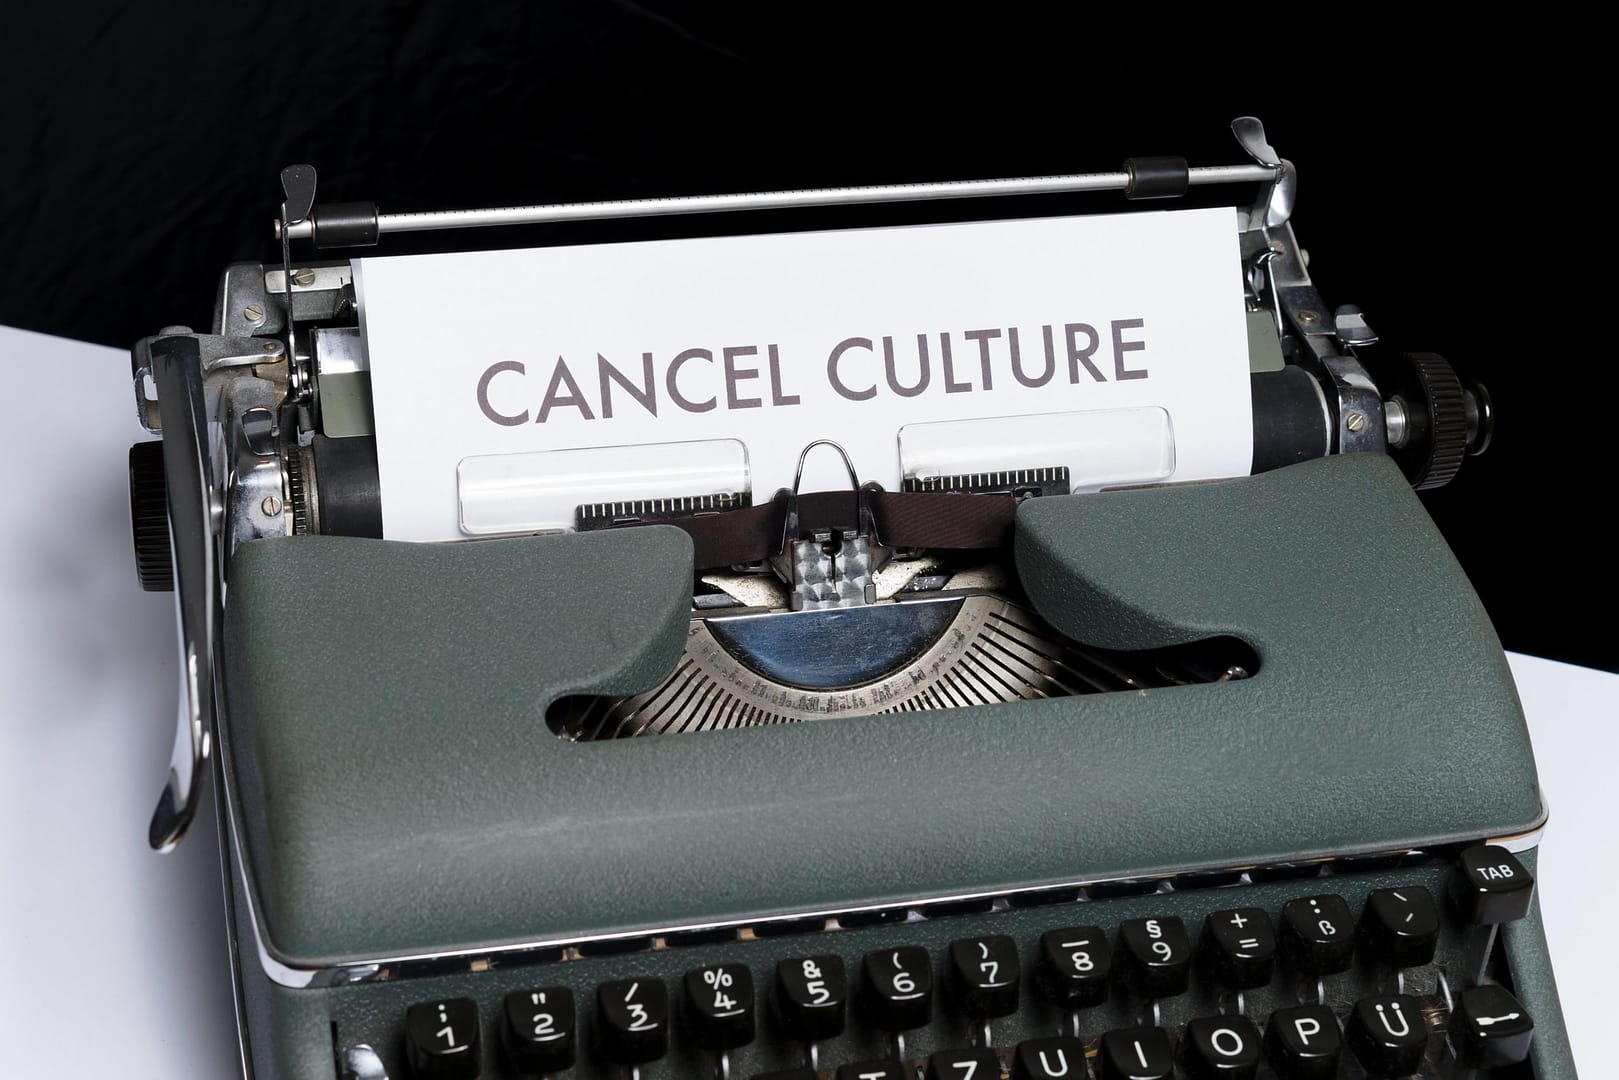 Cancel culture: where did it come from and what can we do about it?